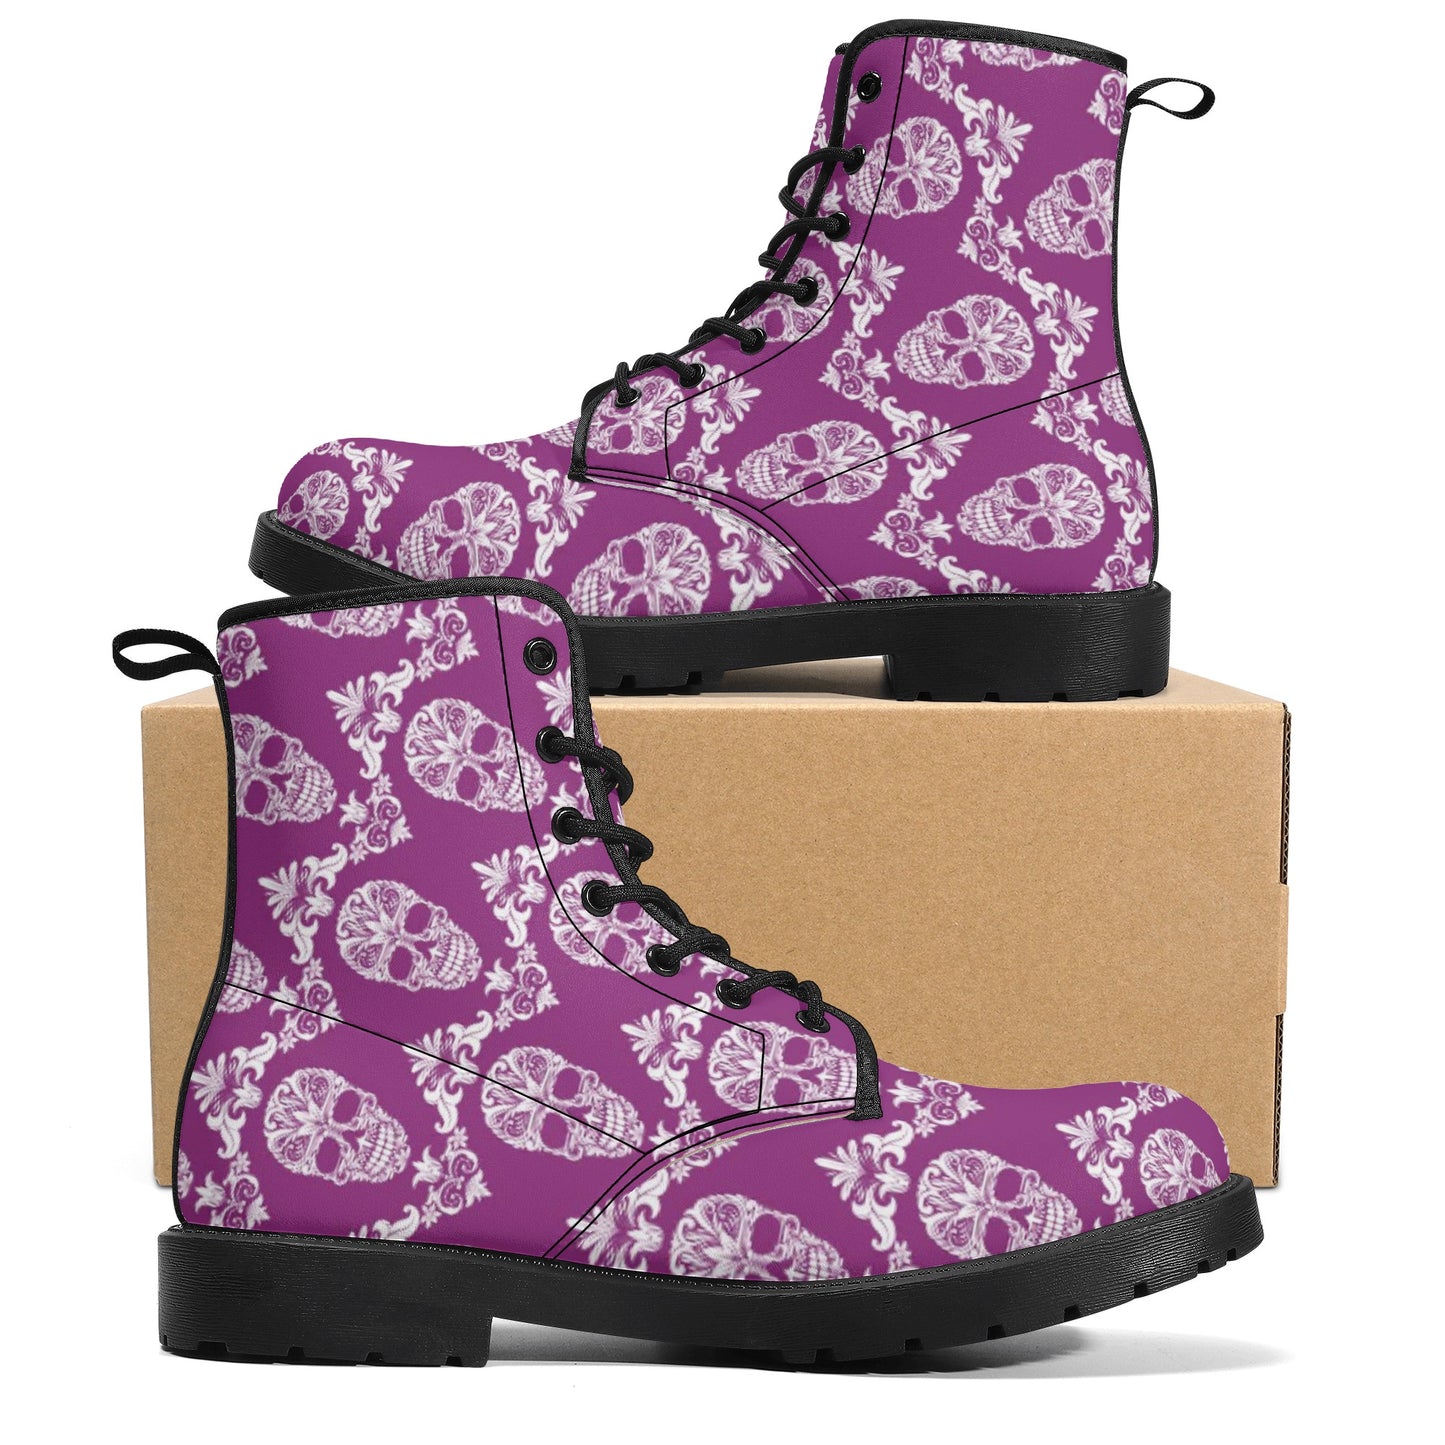 Day of the dead candy skull calaveras Men's Leather Boots